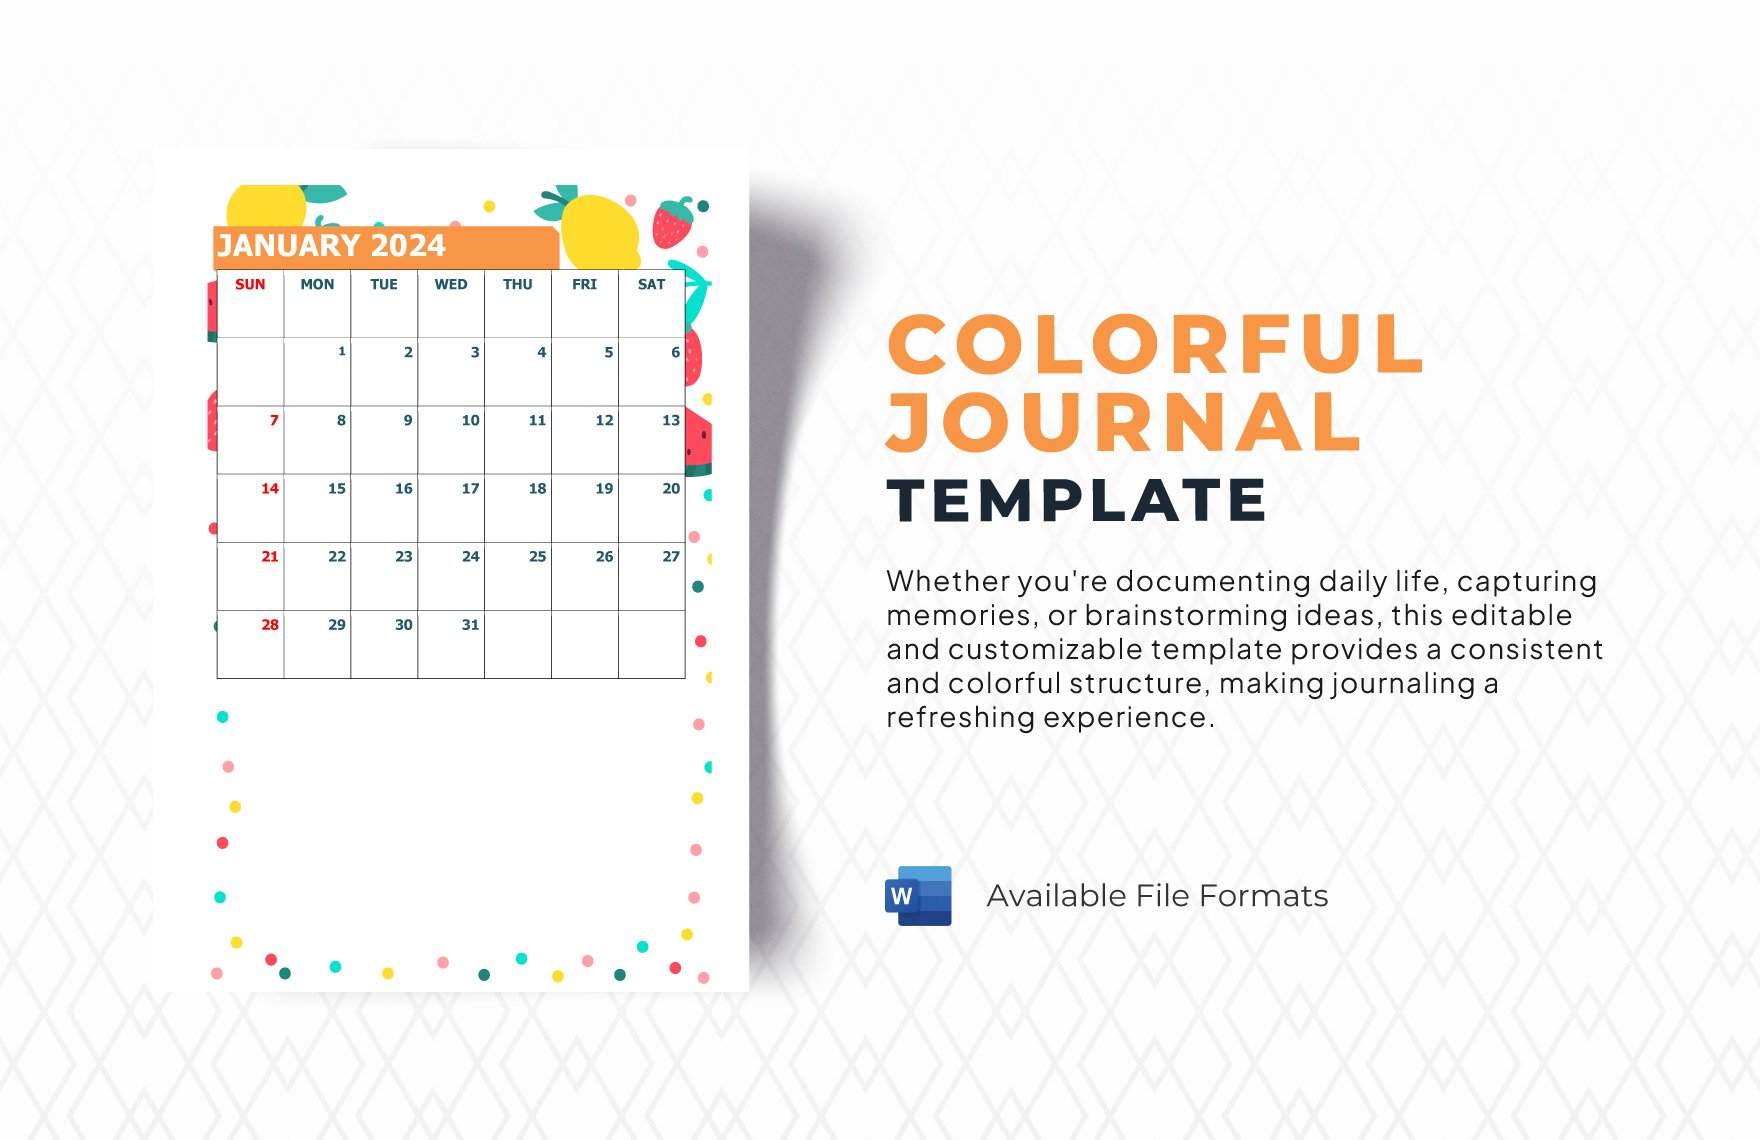 Colorful Journal Template